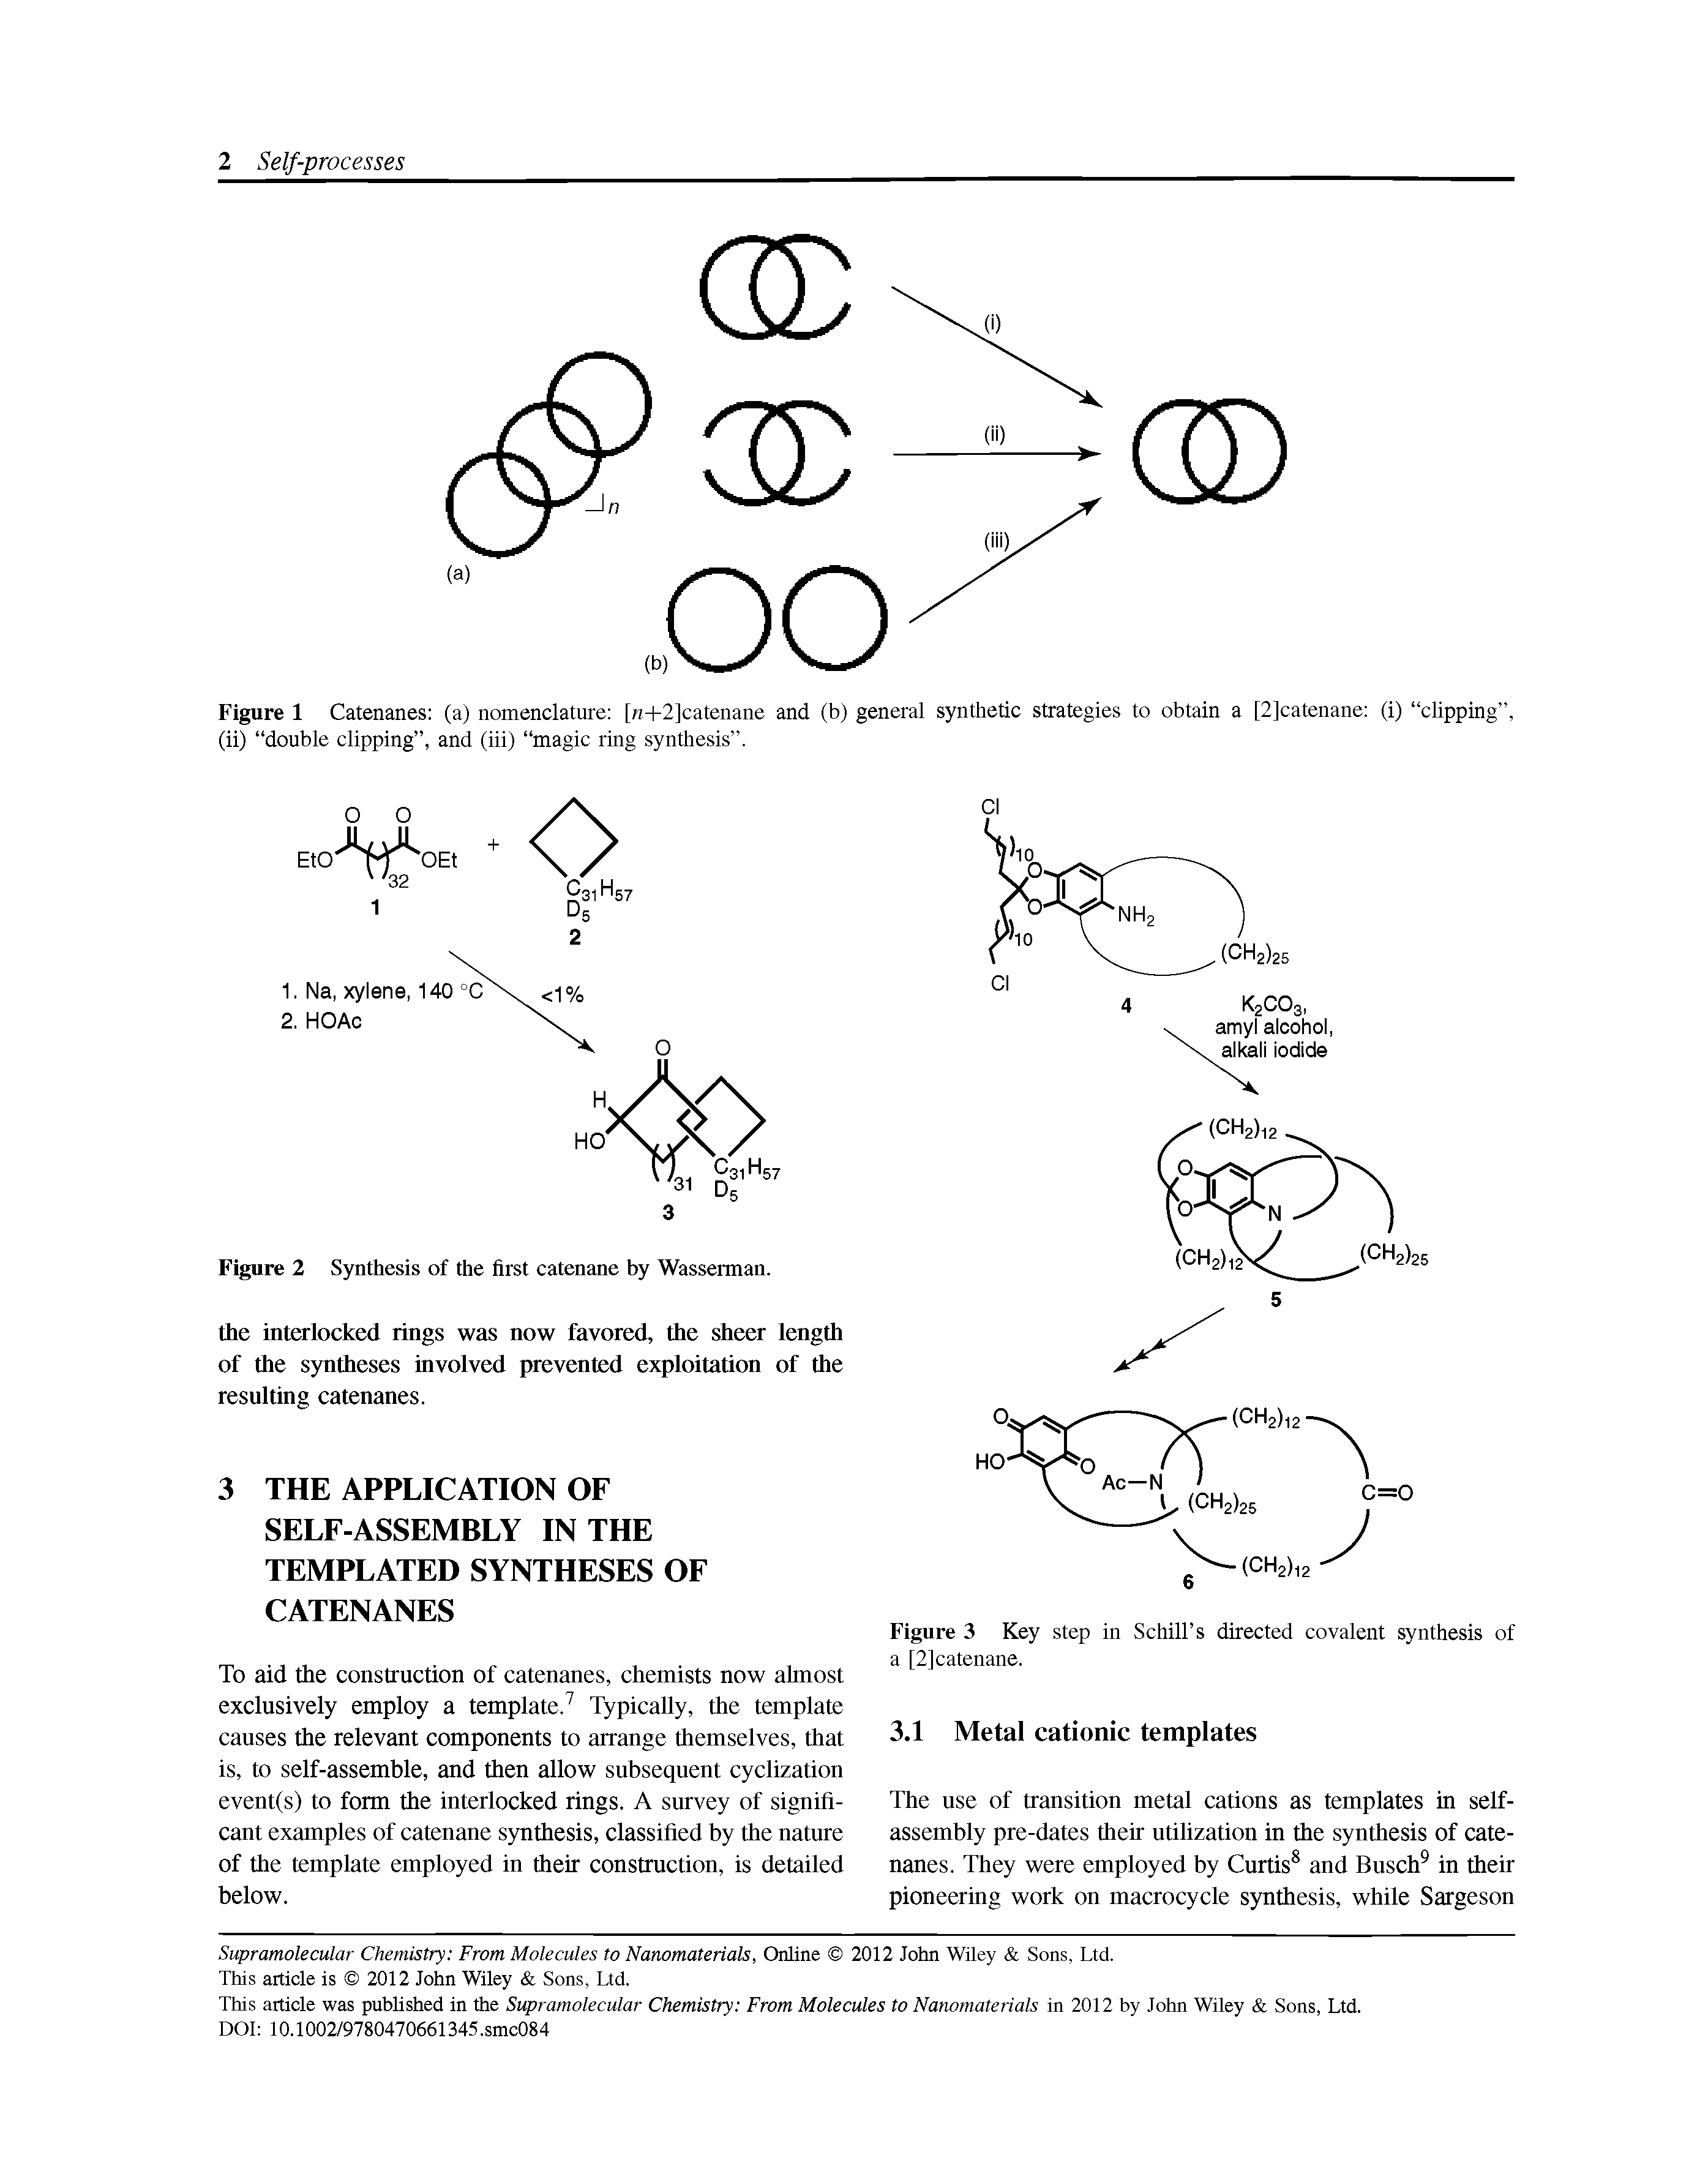 Figure 1 Catenanes (a) nomenclature [w+2]catenane and (b) general synthetic strategies to obtain a [2]catenane (i) clipping (ii) double clipping , and (iii) magic ring synthesis .